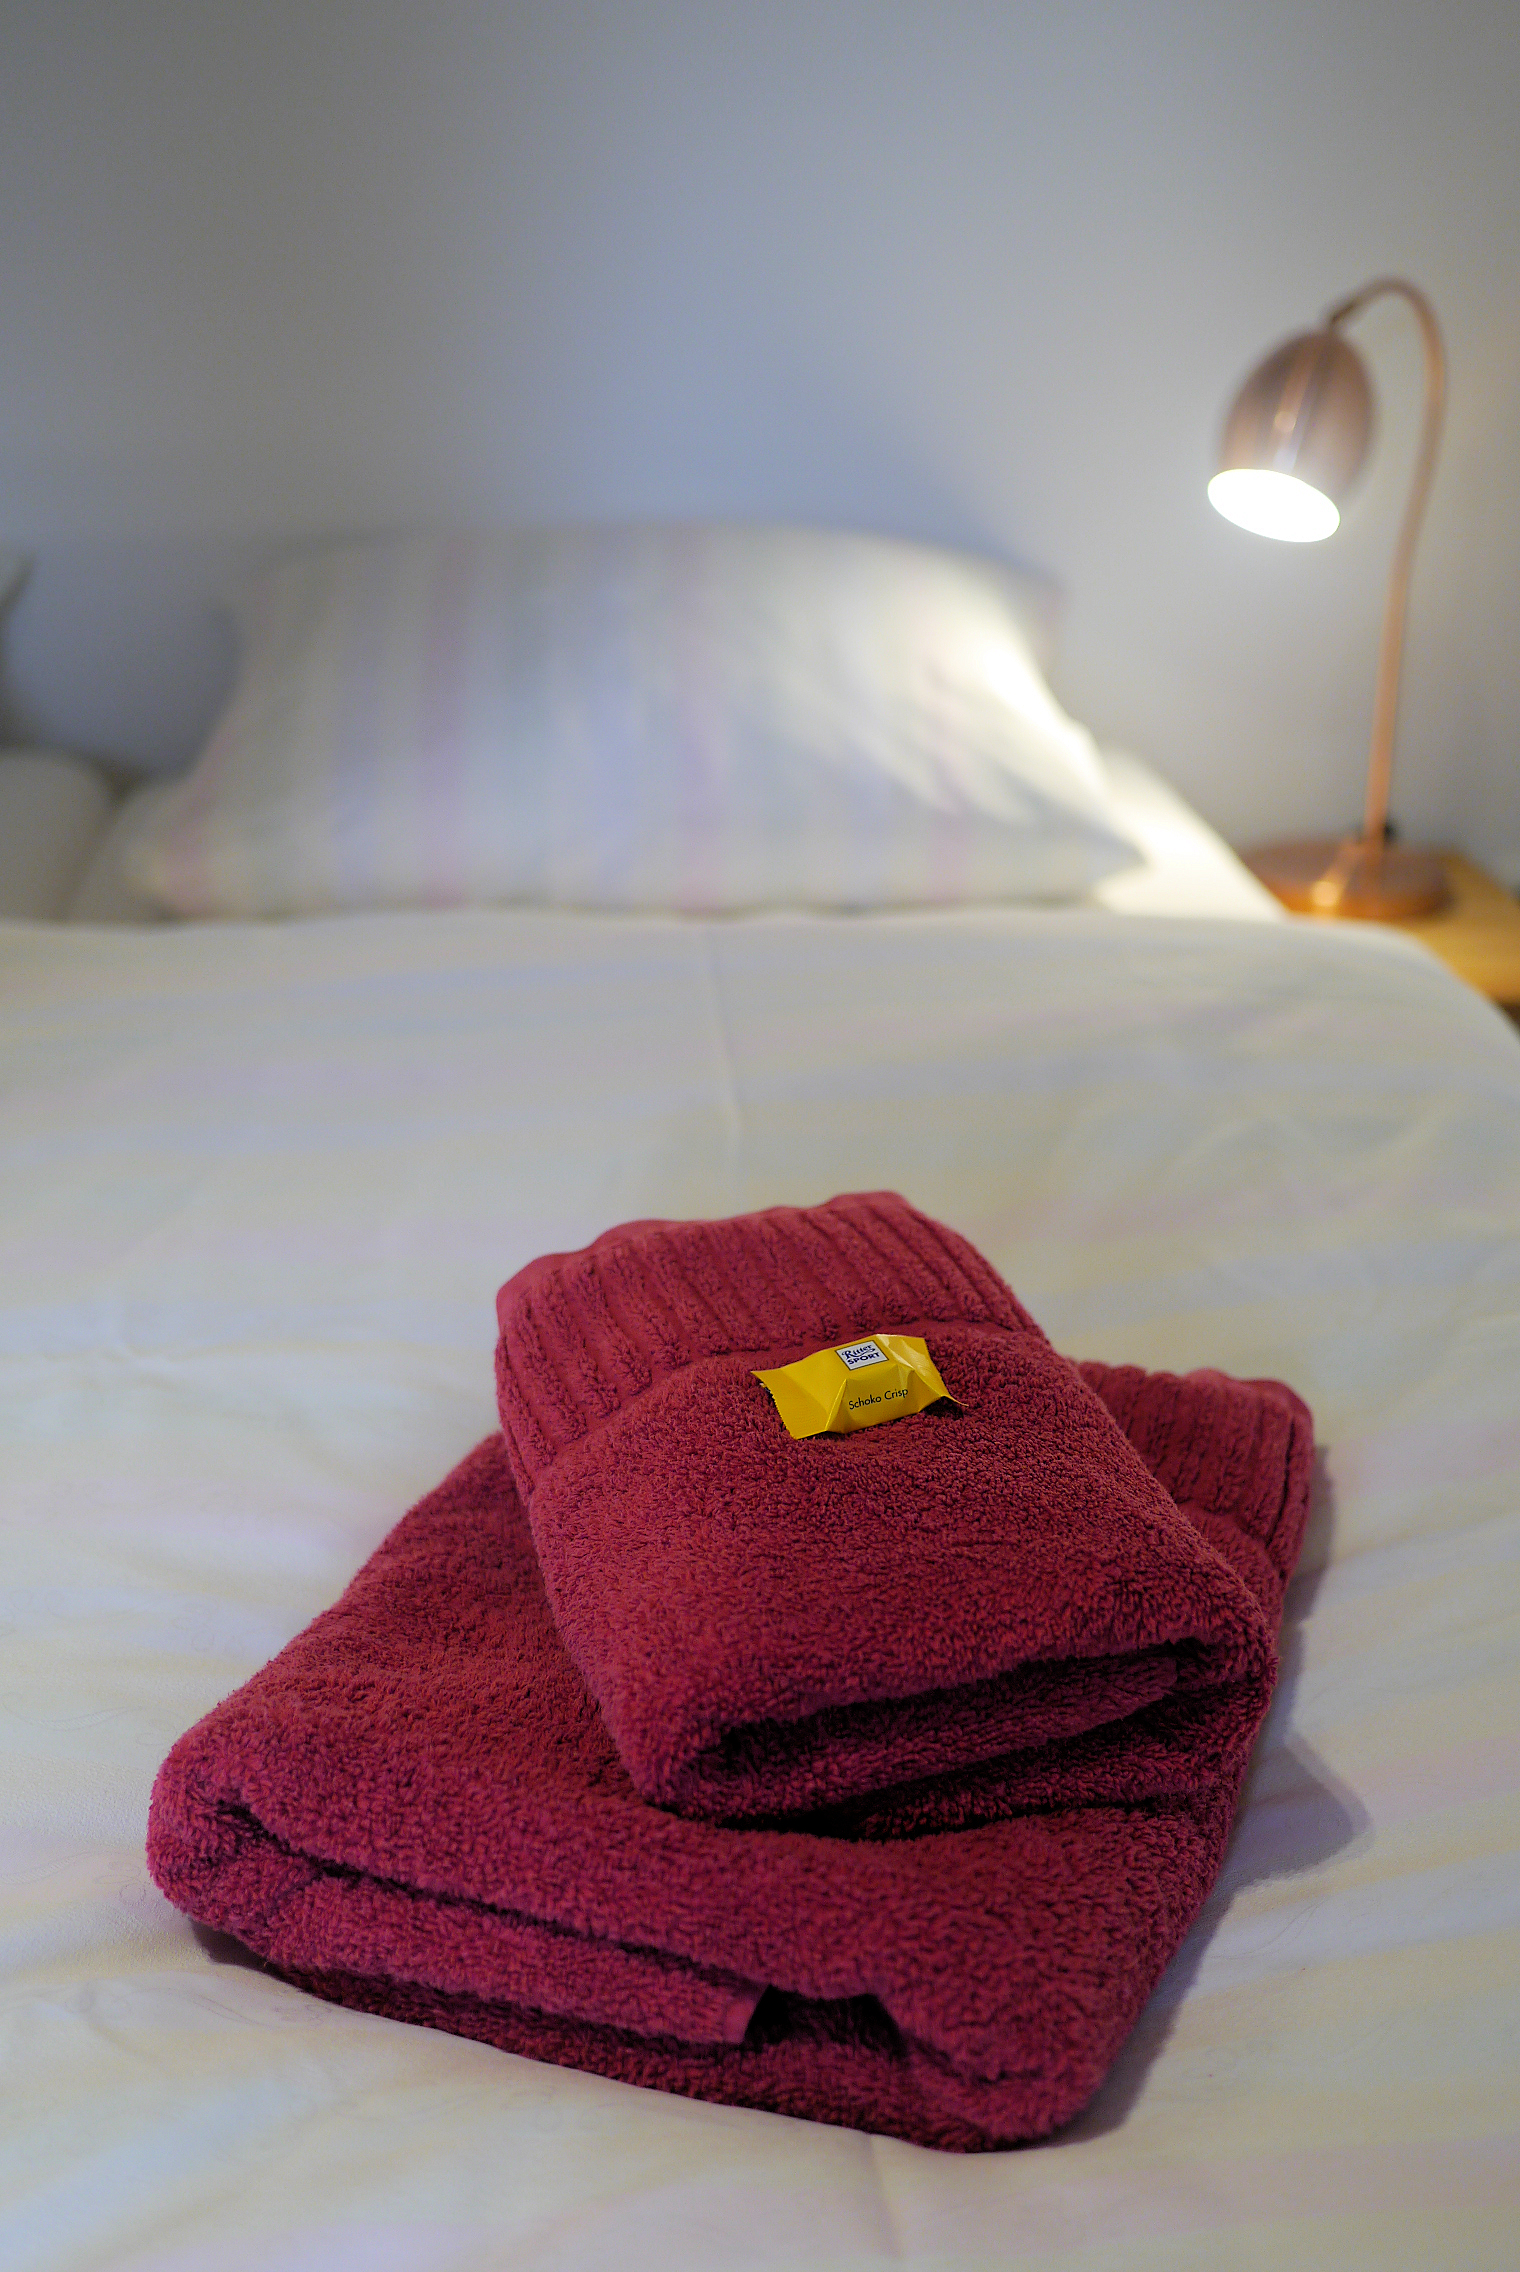 We provide clean towels for your stay.